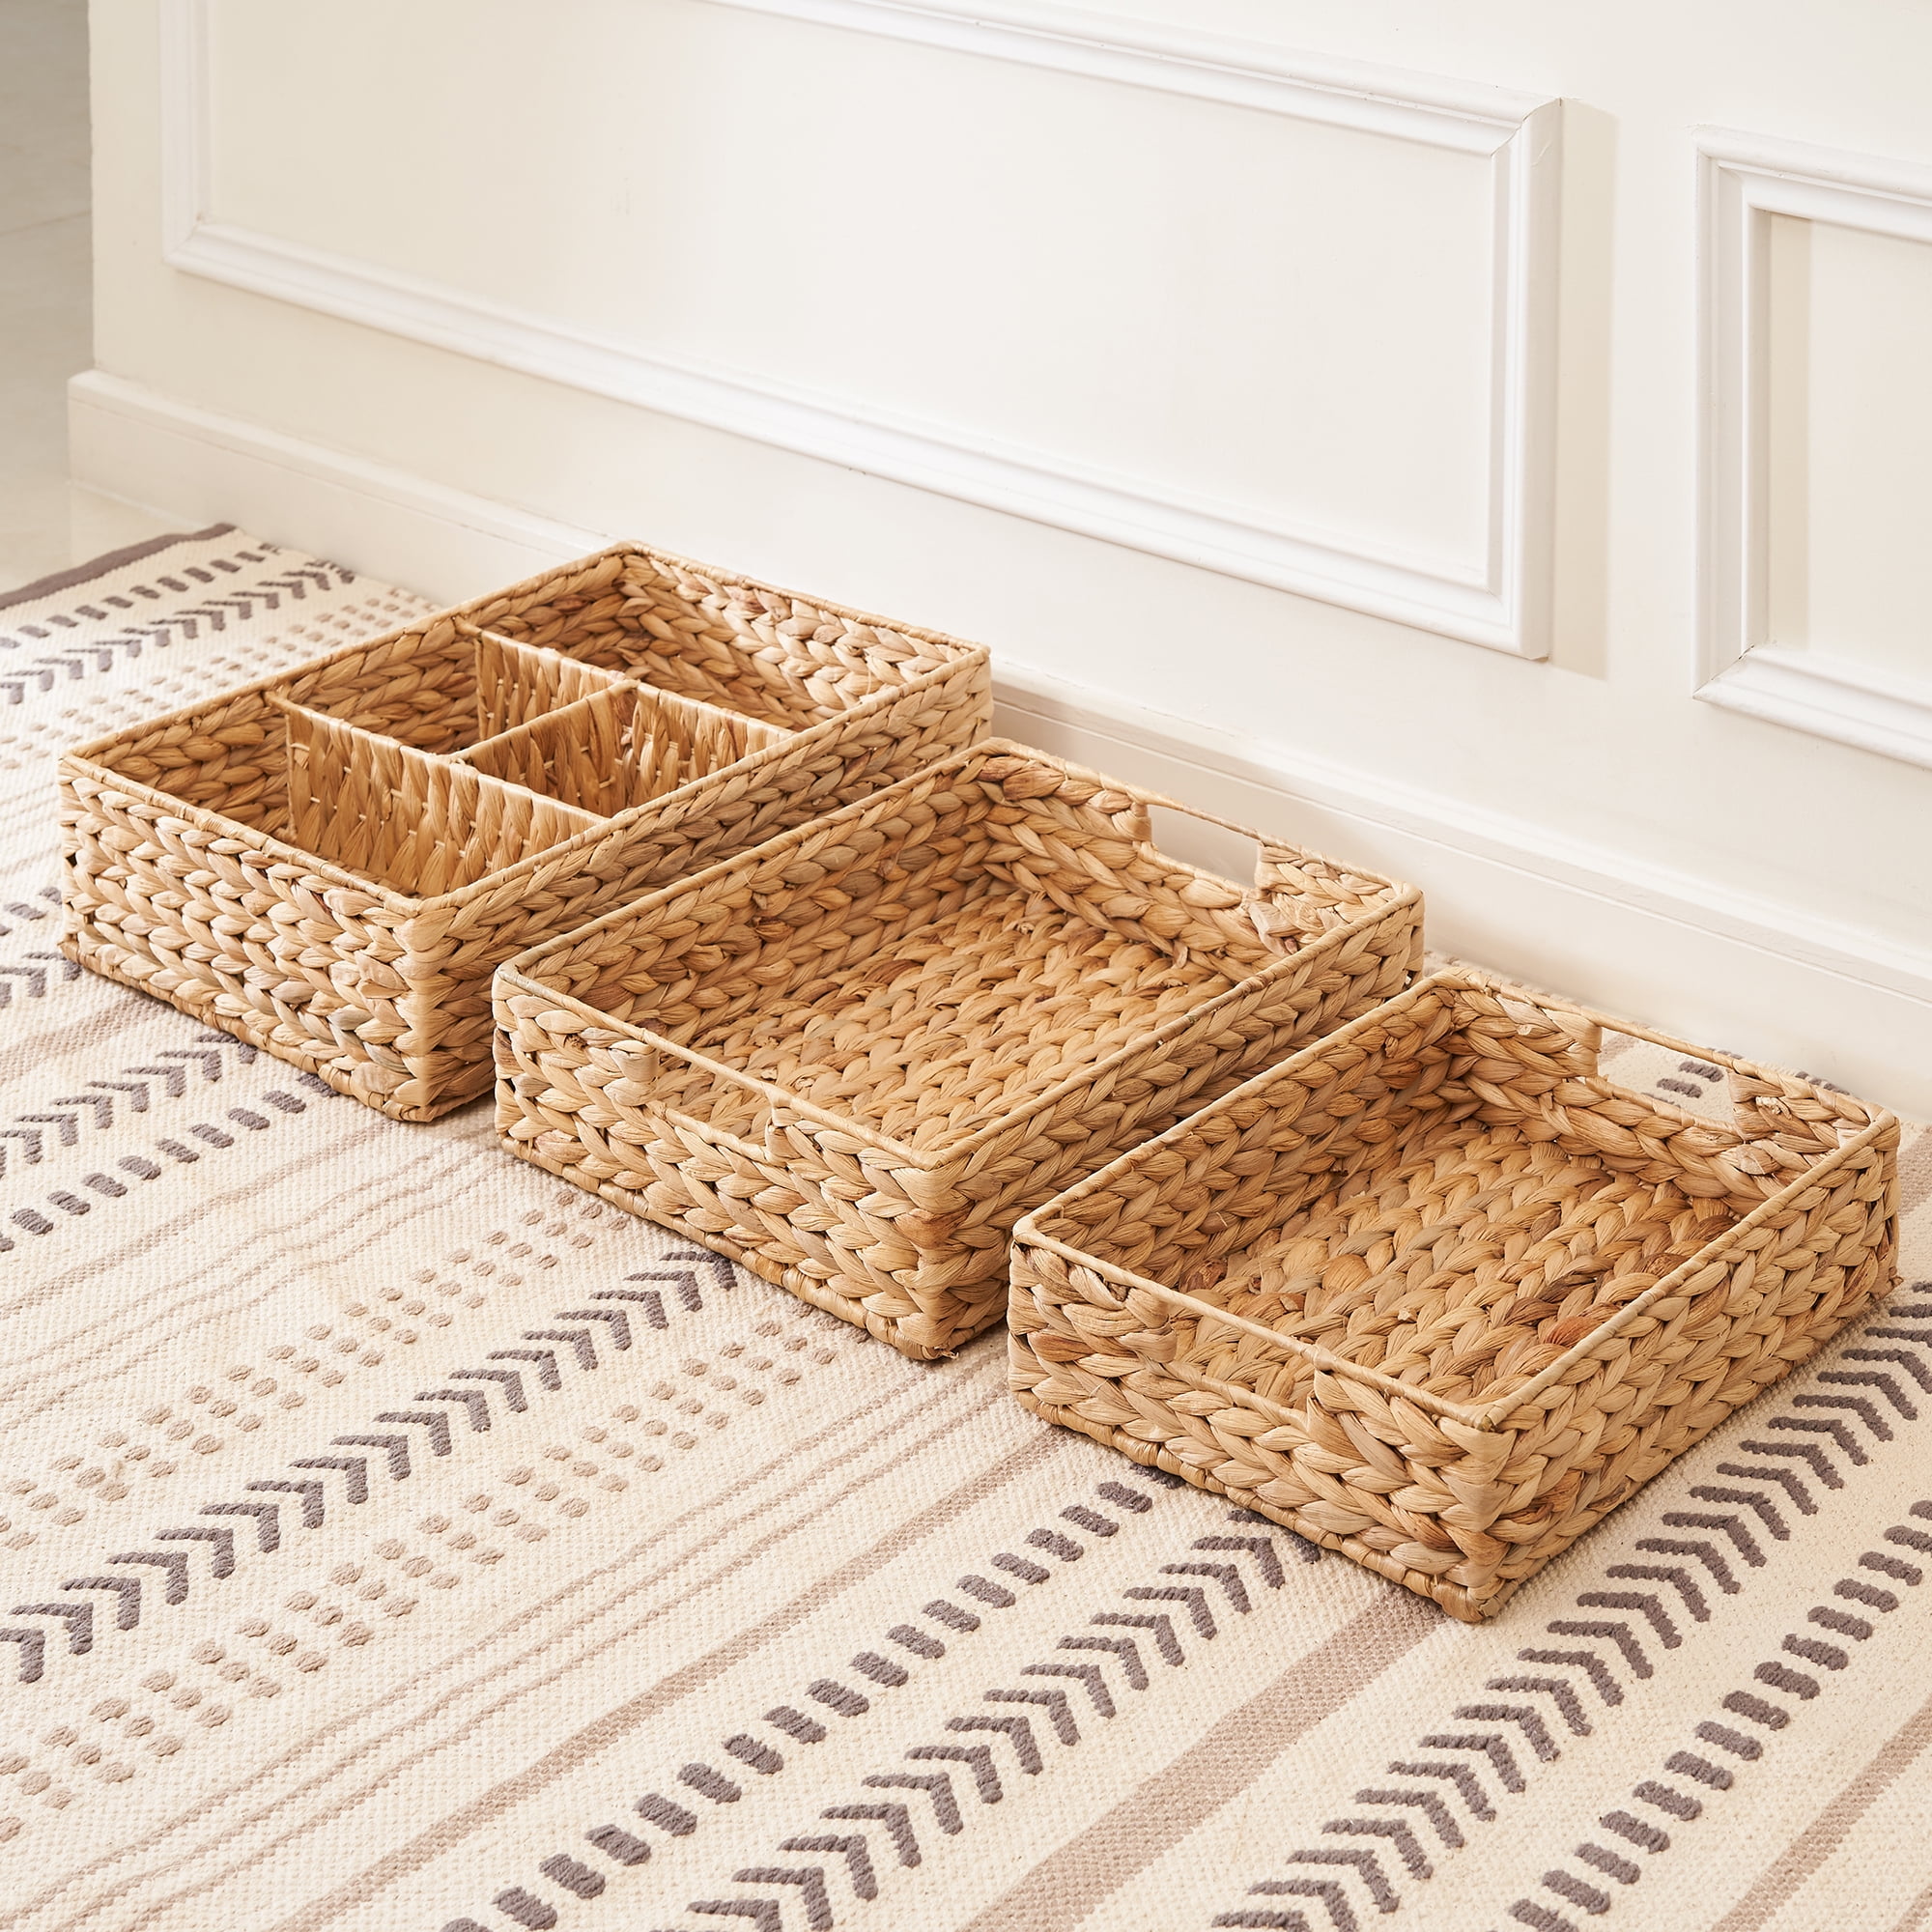 Amelia 3-piece Assorted Hand-woven Water Hyacinth Wicker Storage and Organizing Tray Set